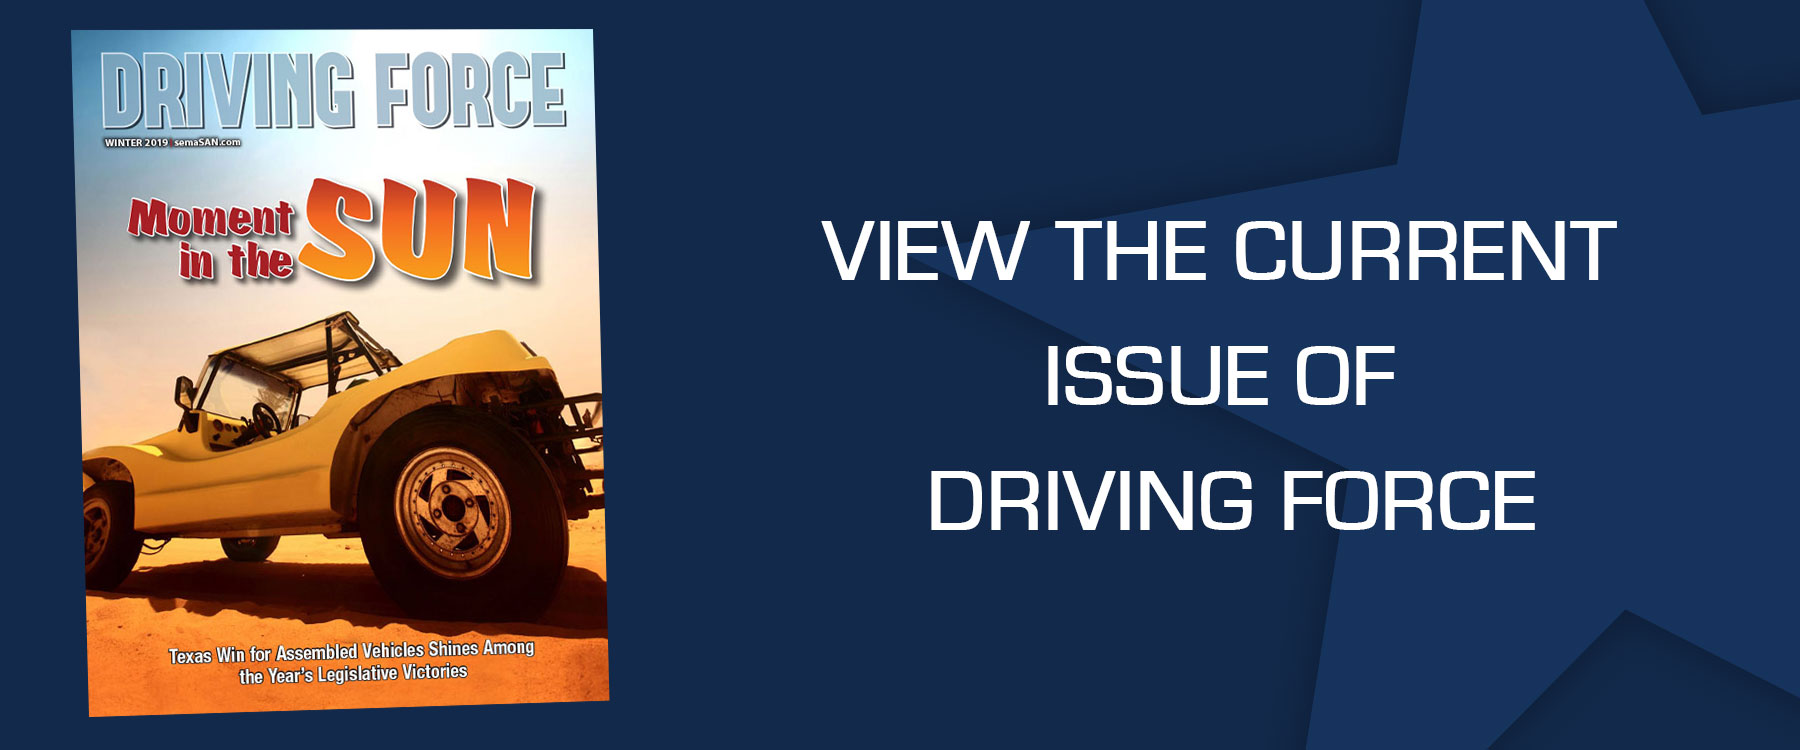 Driving Force Current Issue - Moment in the Sun